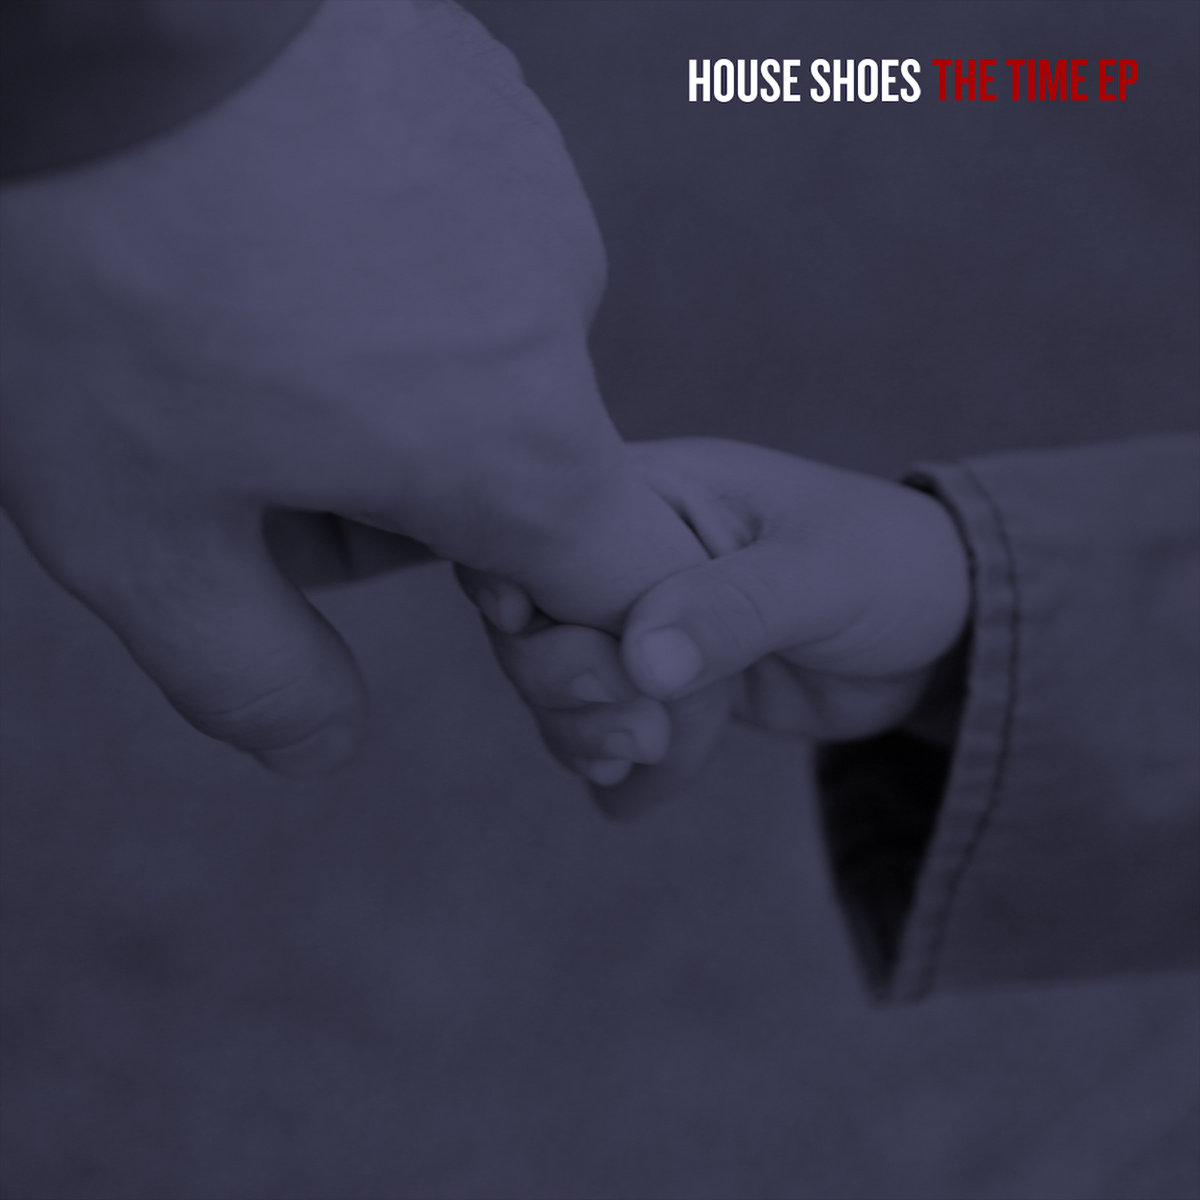 The_time_ep_house_shoes